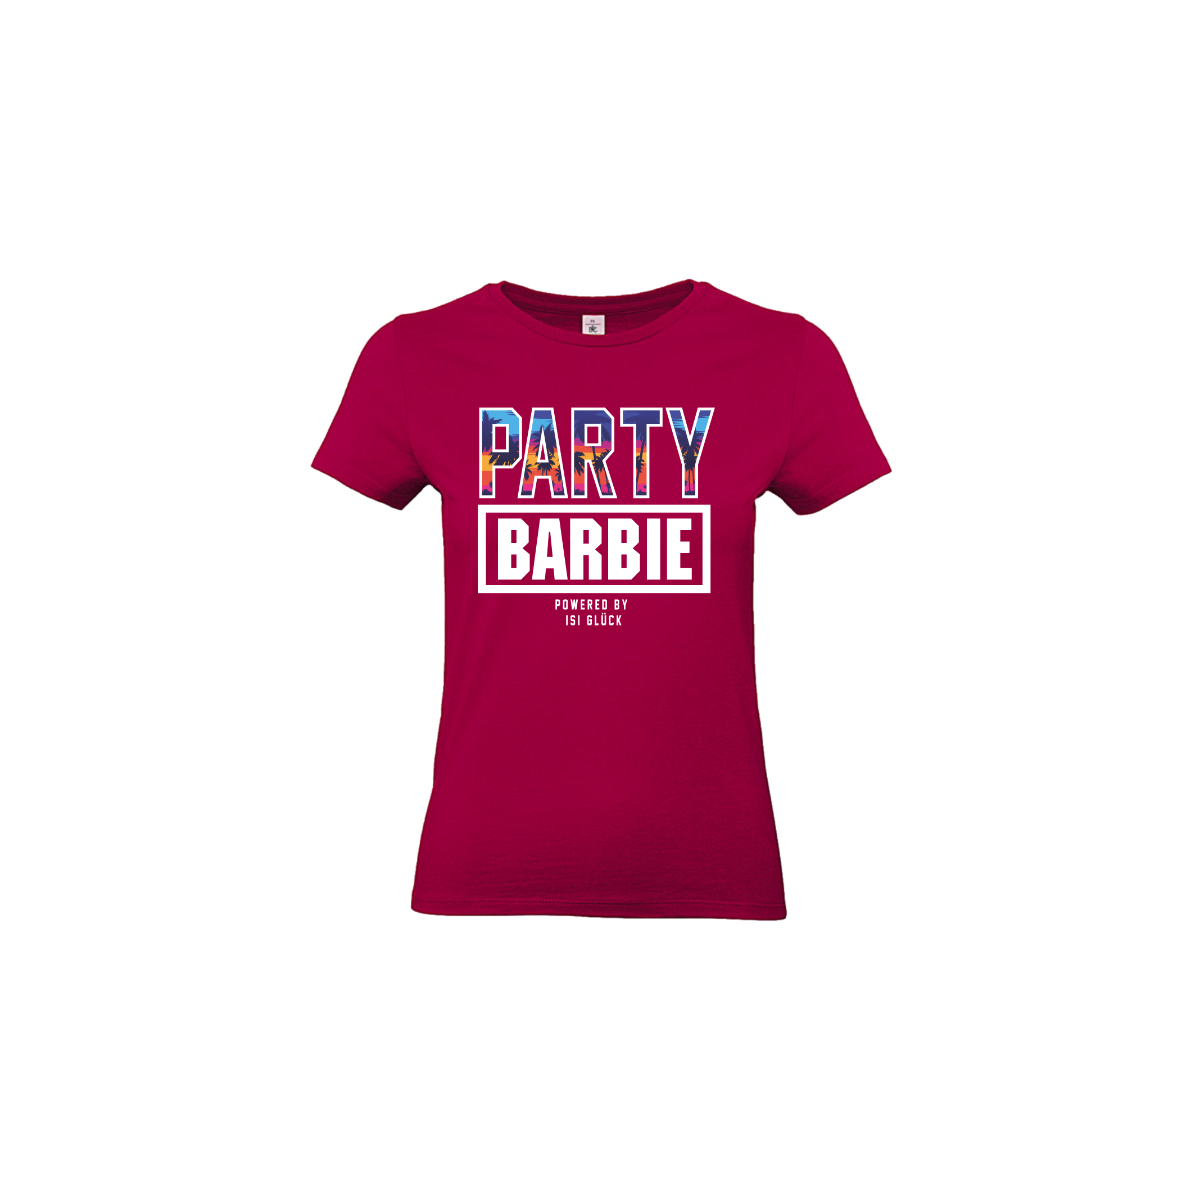 Girly-Shirt "PARTYBARBIE" sorbet